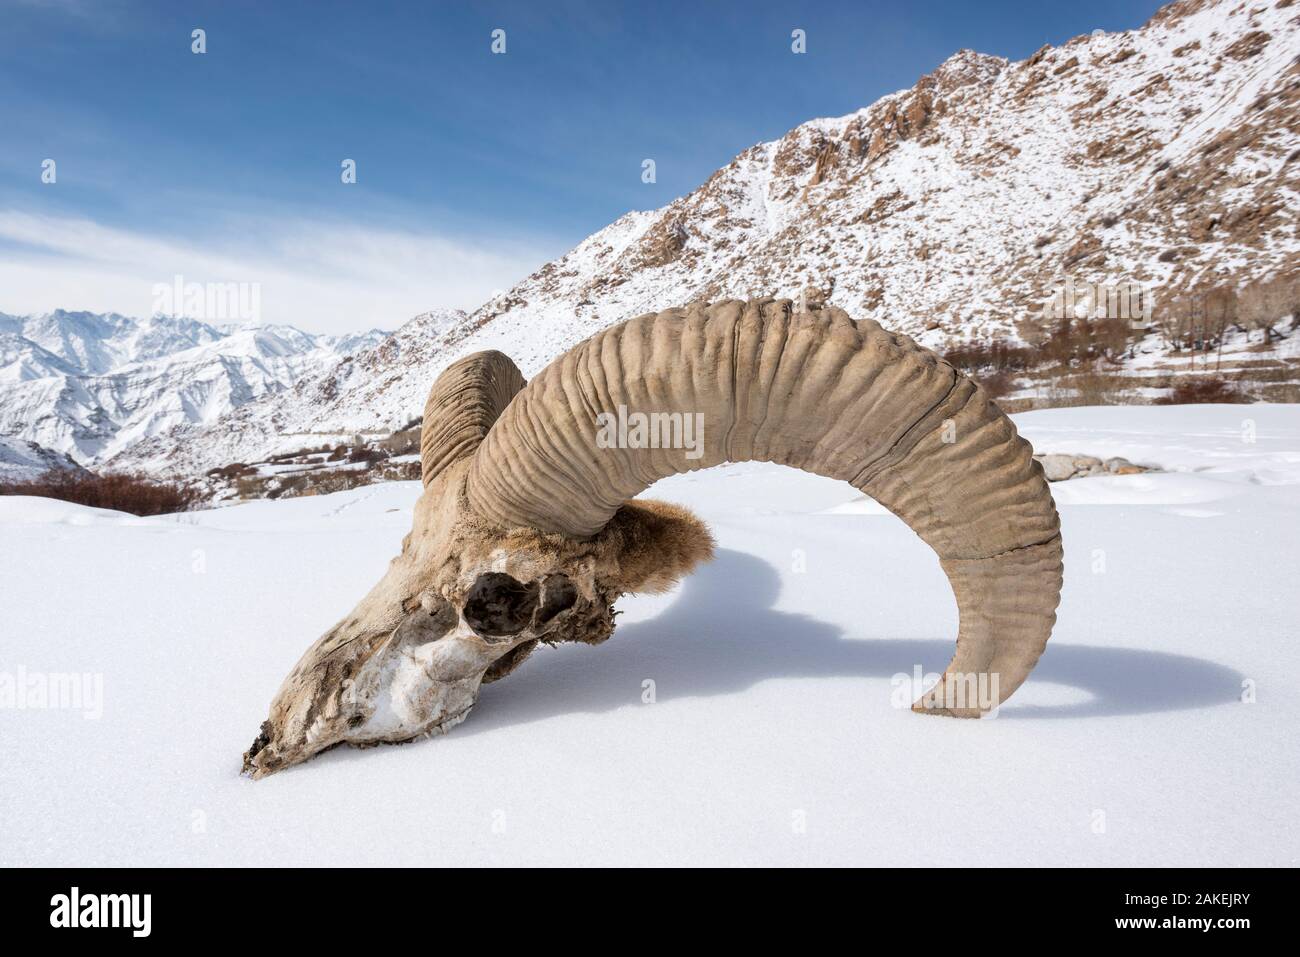 Skull of male Urial sheep (Ovis vignei) on snow covered slope. Himalayas near Ulley, Ladakh, India. Stock Photo